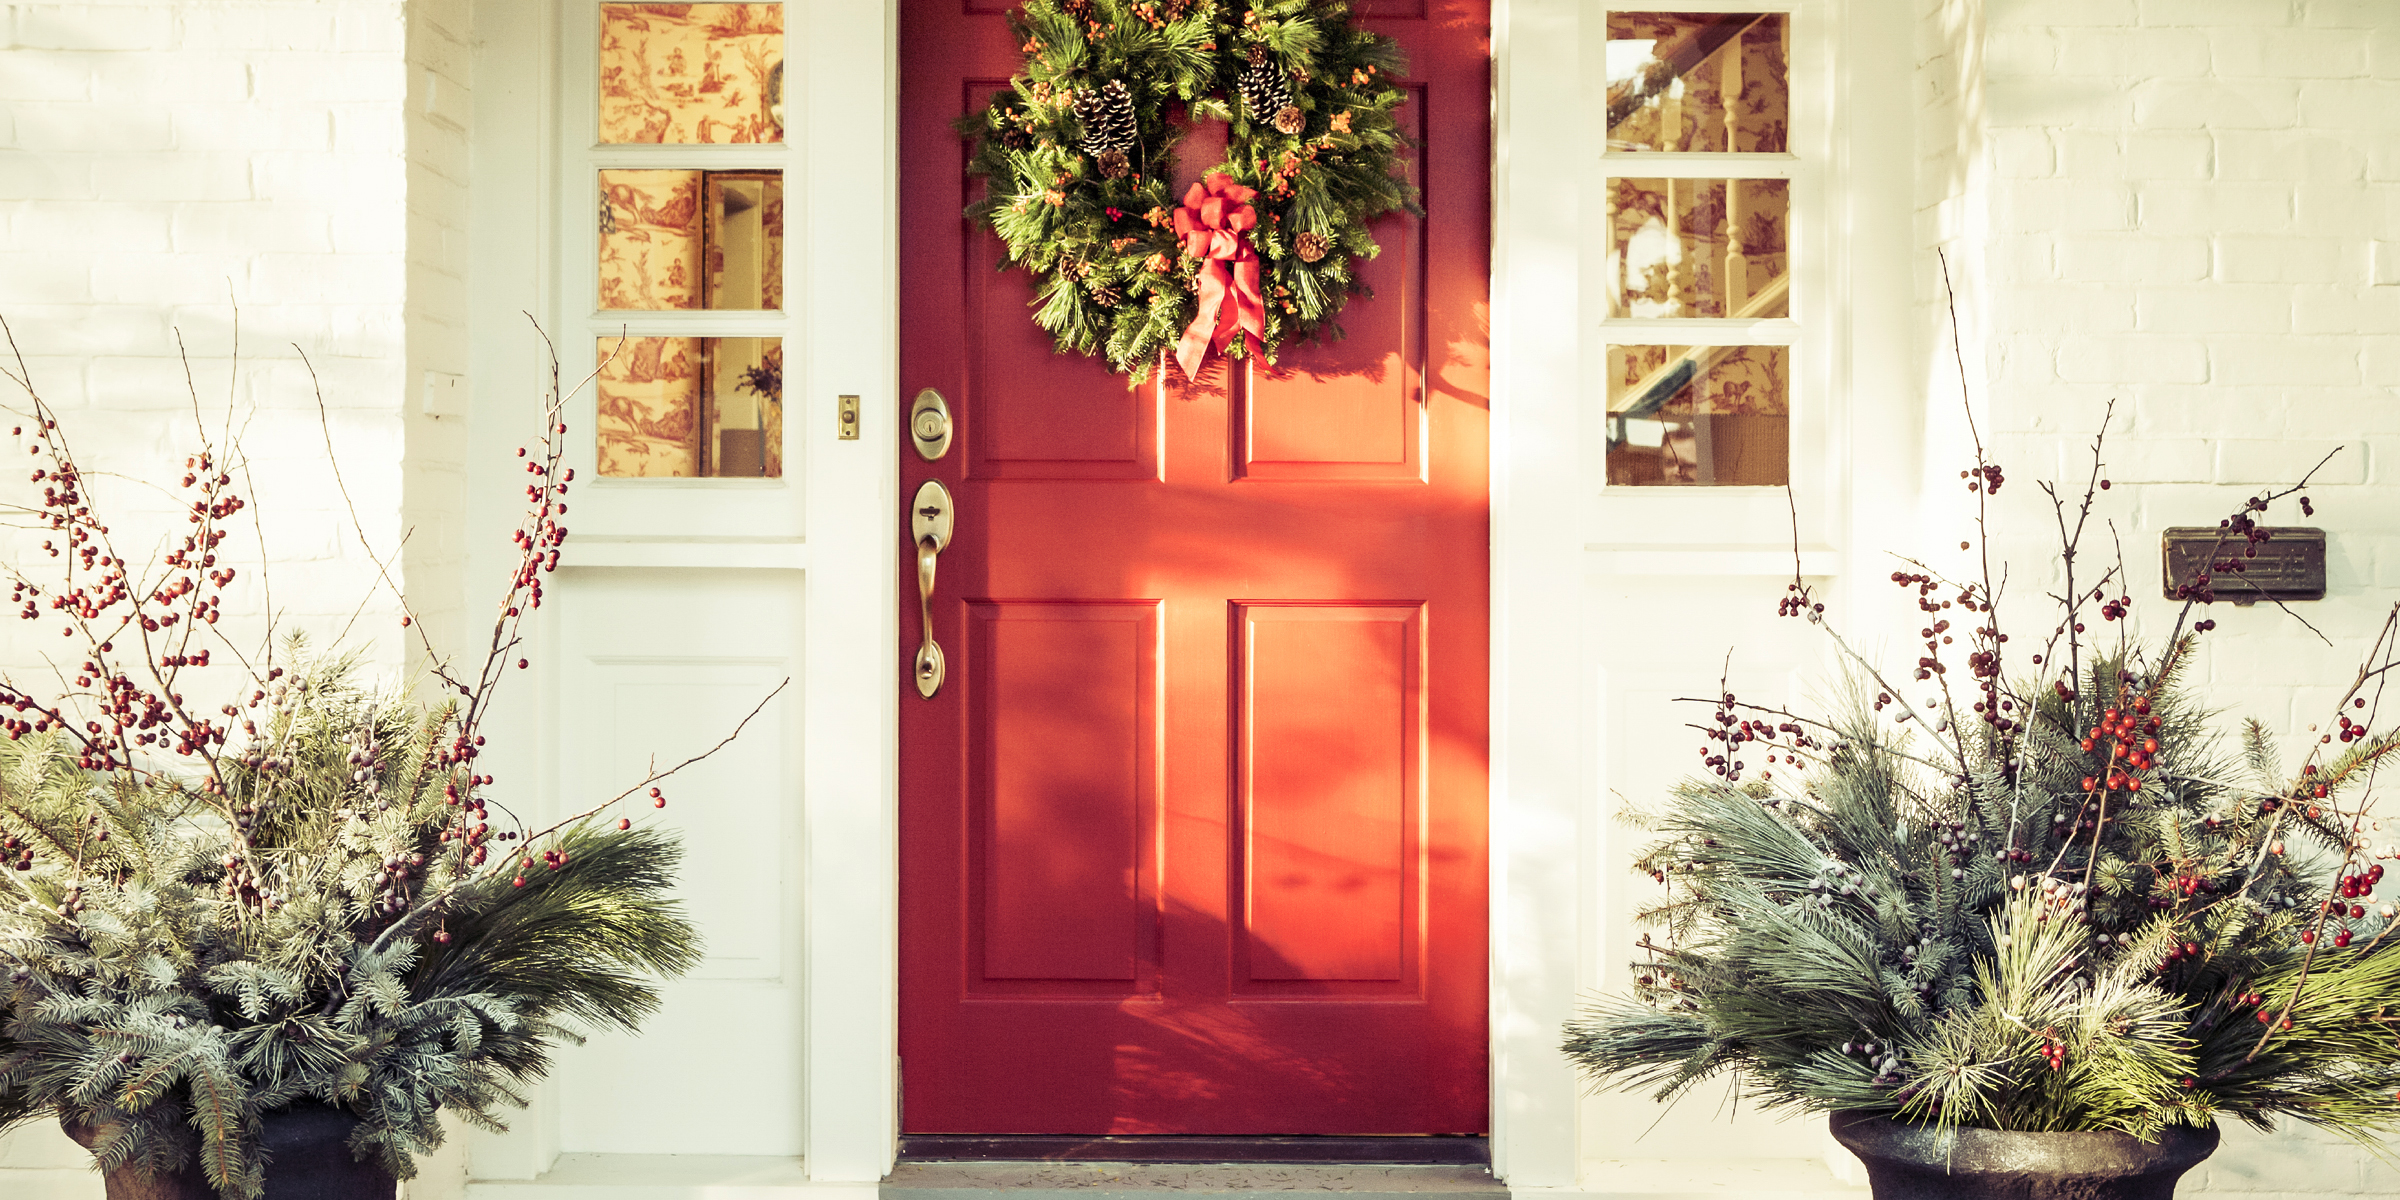 A red door decorated for Christmas | Source: Getty Images